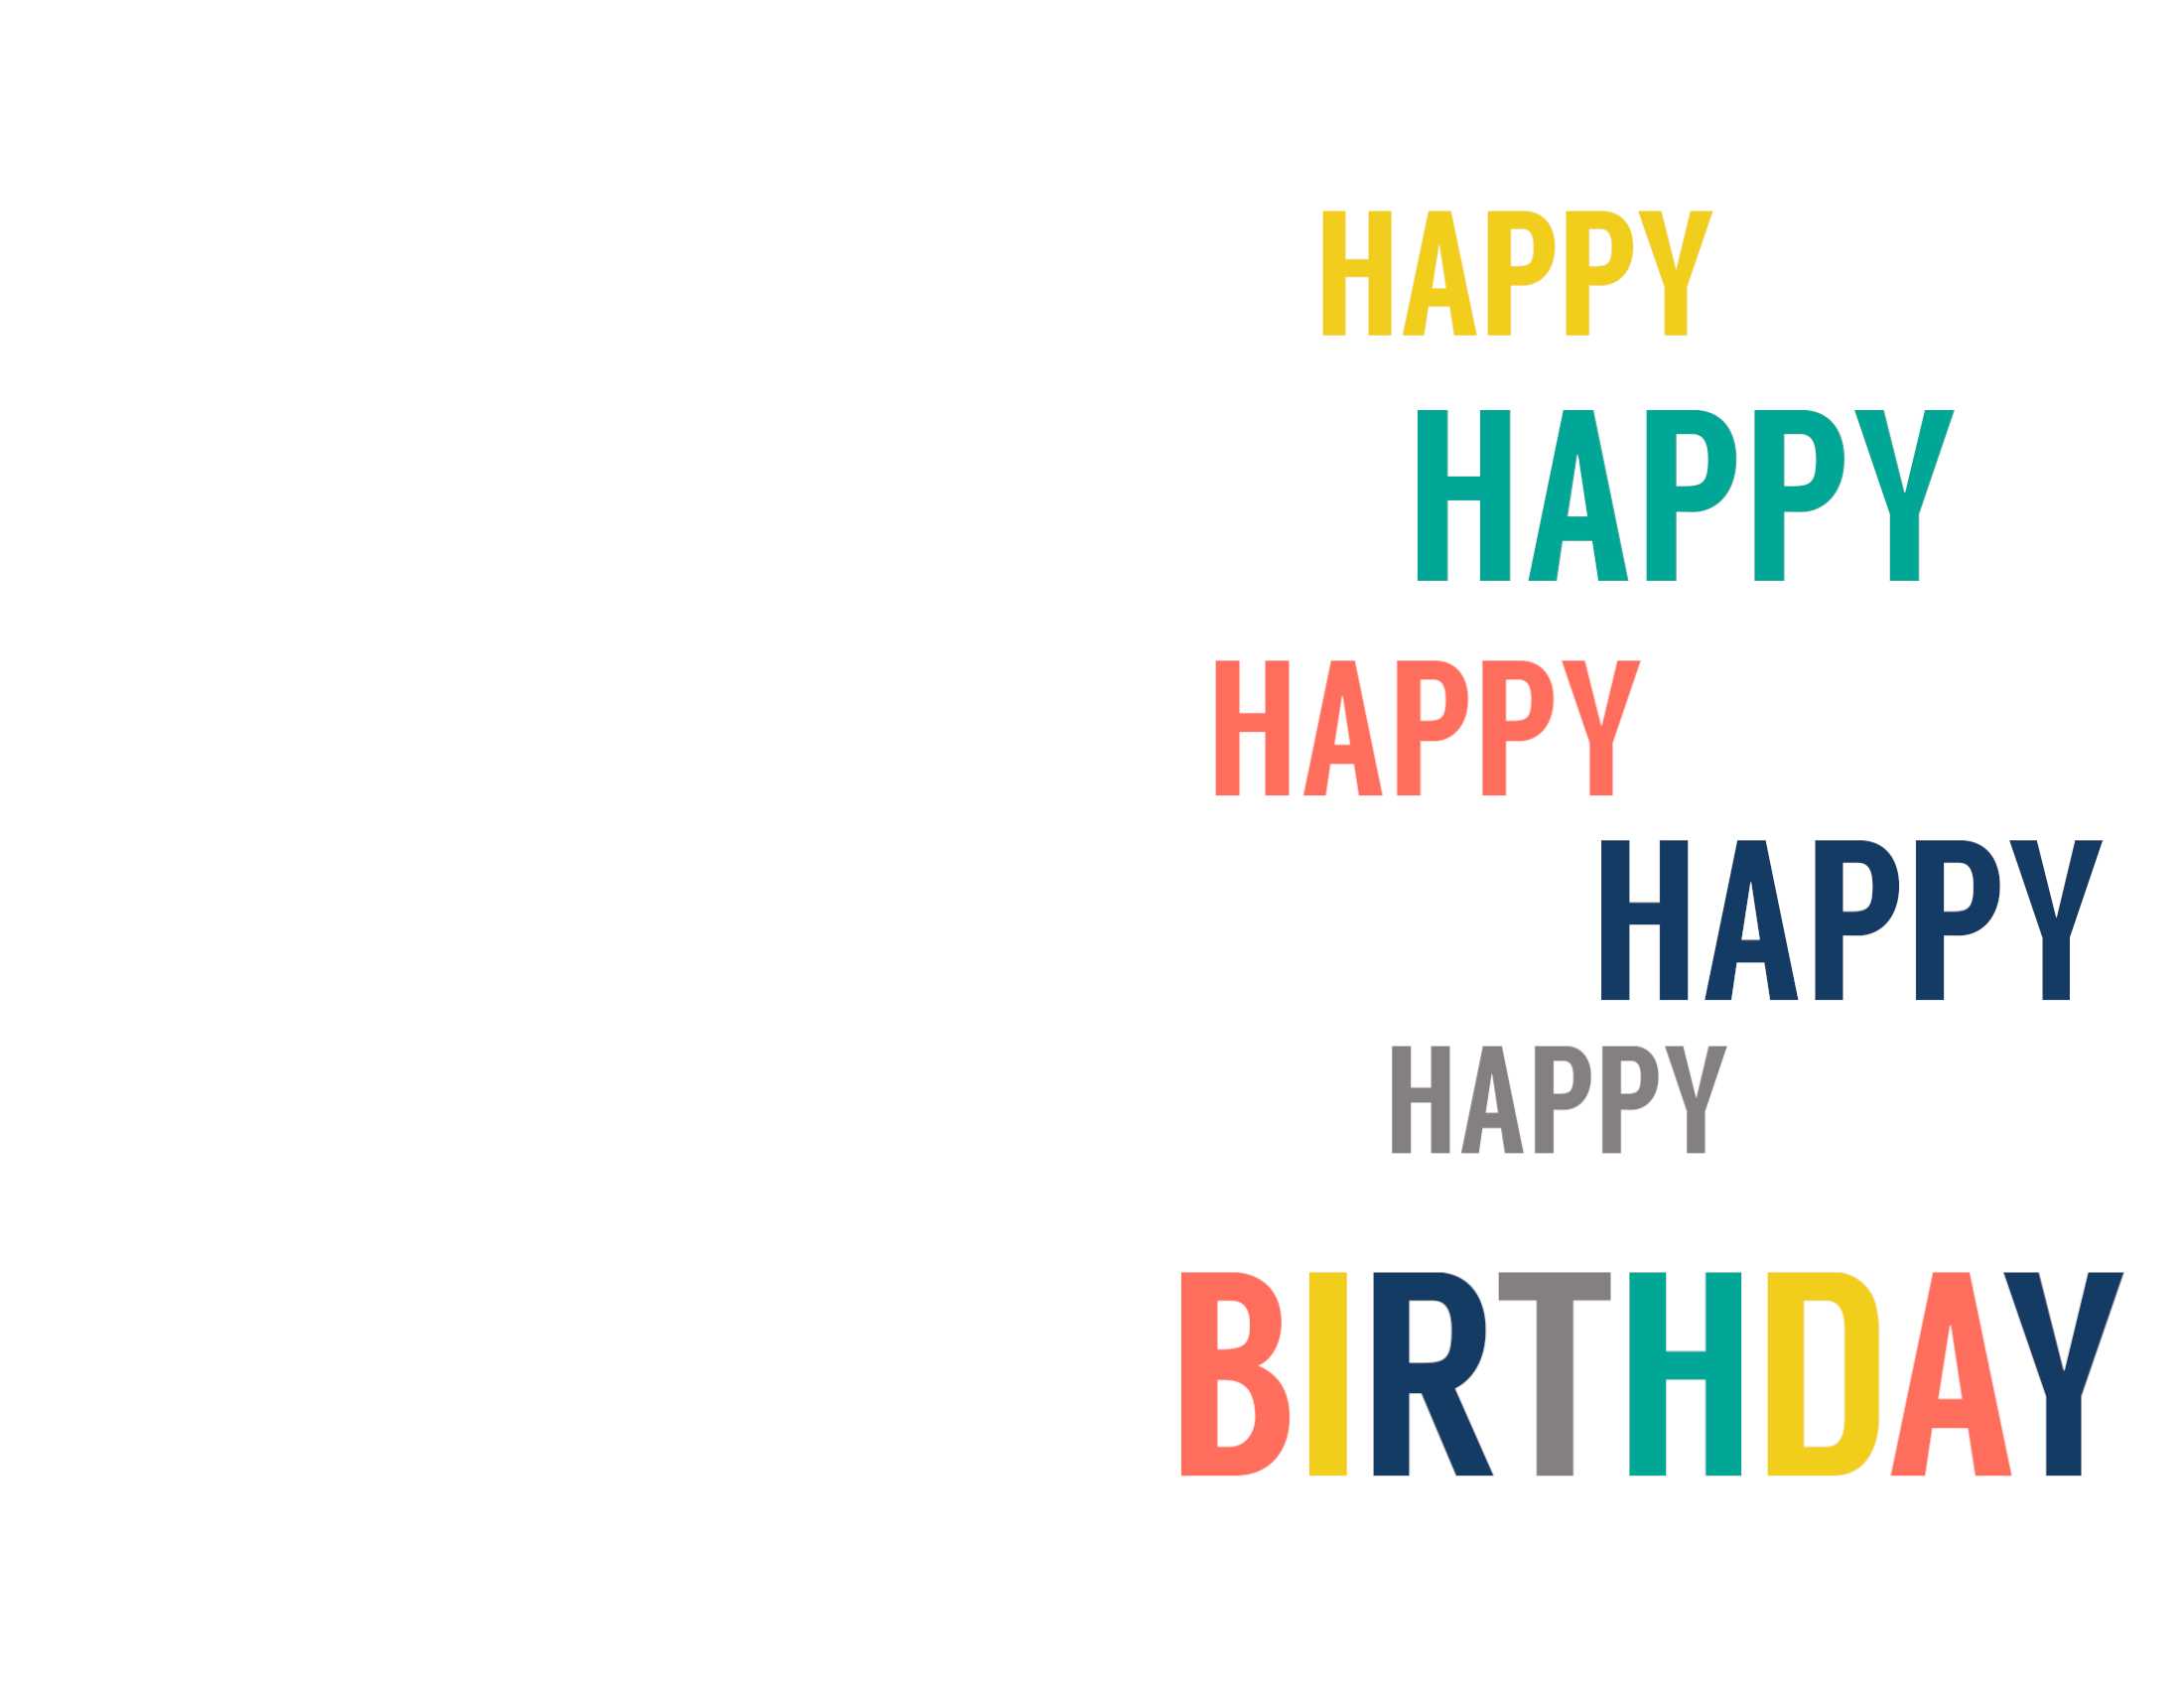 Free Printable Birthday Cards – Paper Trail Design With Template For Cards To Print Free